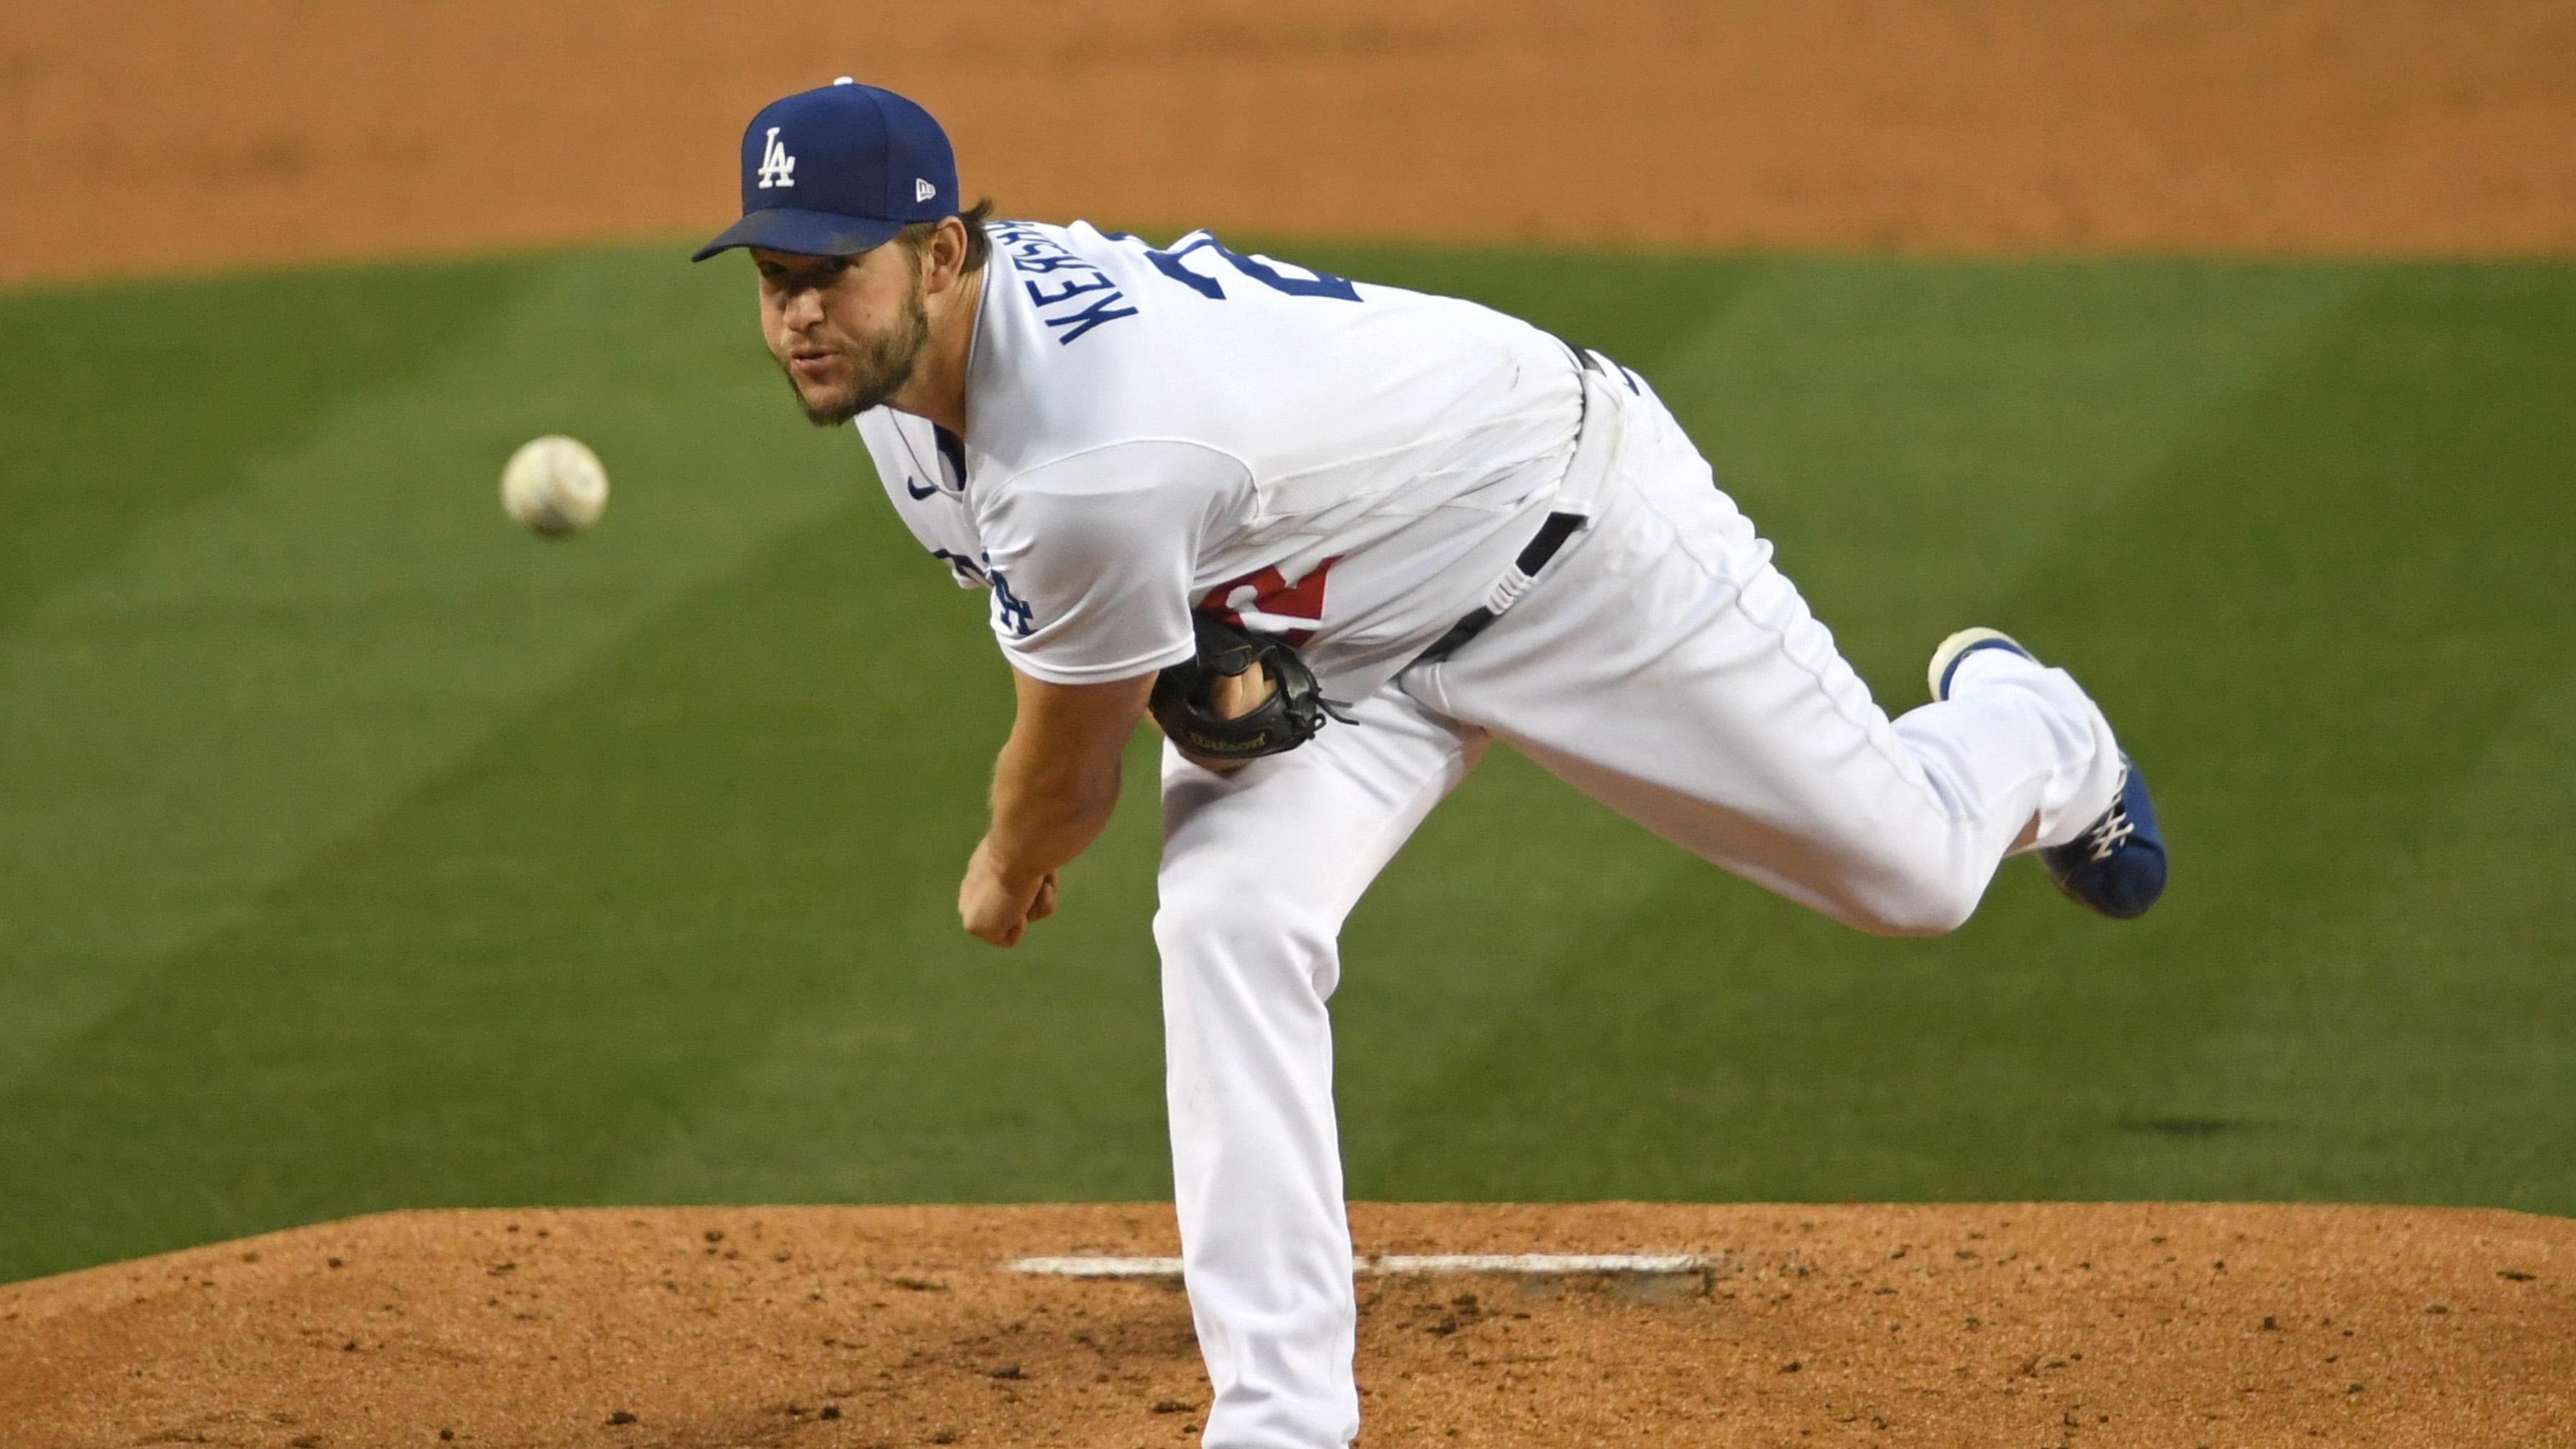 Los Angeles, California, USA; Los Angeles Dodgers starting pitcher Clayton Kershaw (22) pitches in the second inning of the game against the San Diego Padres at Dodger Stadium. / Jayne Kamin-Oncea-USA TODAY Sports